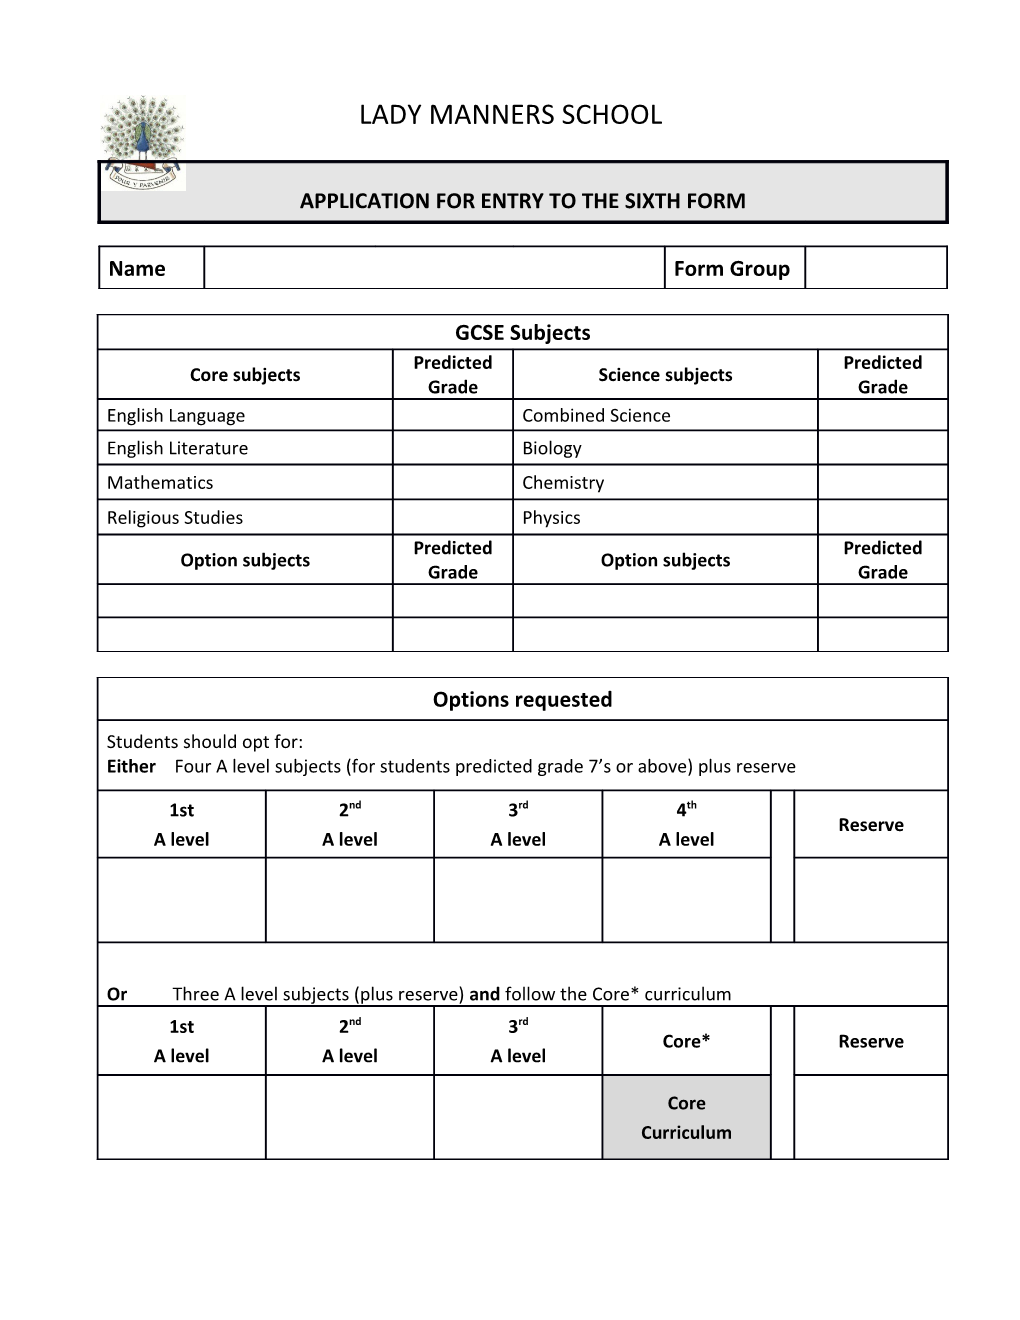 Application for Entry to Sixth Form